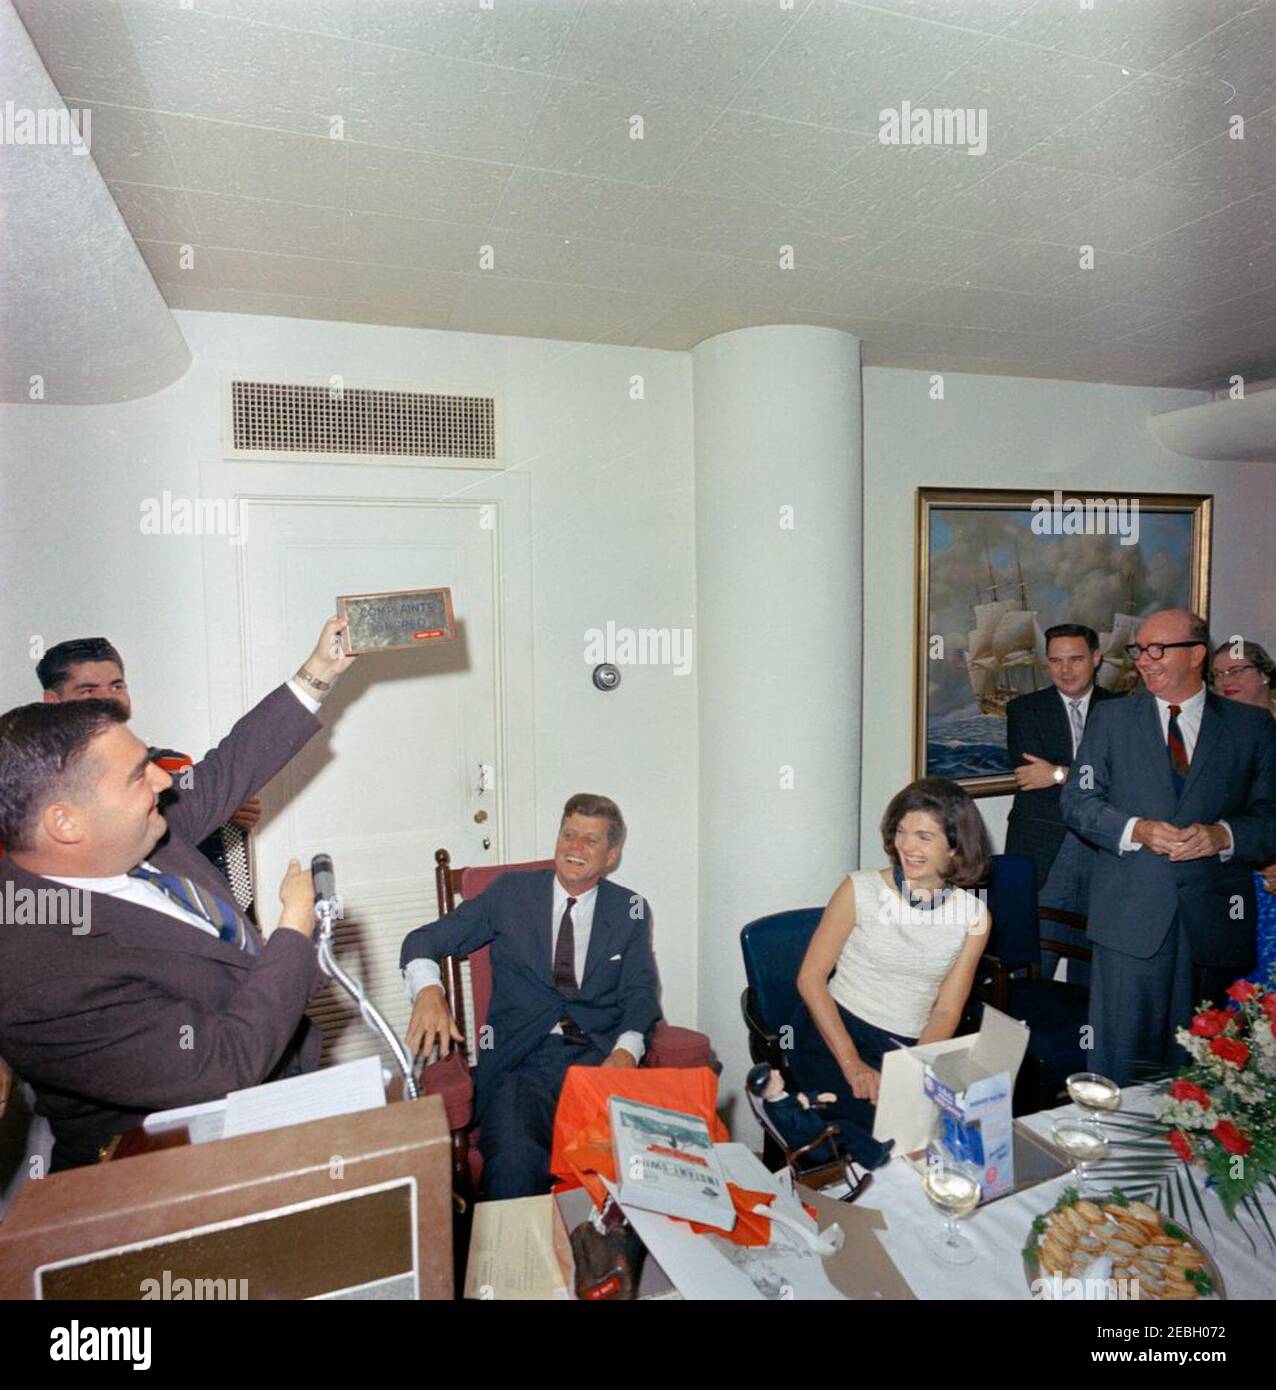 Surprise birthday party for President Kennedy, given by the White House staff, 5:45PM. Press Secretary Pierre Salinger (far left) holds up a plaque that reads u201cComplaints Ignored / Henry Luce,u201d during a surprise party thrown by members of the White House staff in honor of President John F. Kennedyu2019s 46th birthday. President Kennedy (sitting in rocking chair) and First Lady Jacqueline Kennedy laugh as Salinger opens gifts. Presidential Aide Dave Powers stands second from right (wearing glasses); others are unidentified. Navy Mess Hall, White House, Washington, D.C. Stock Photo